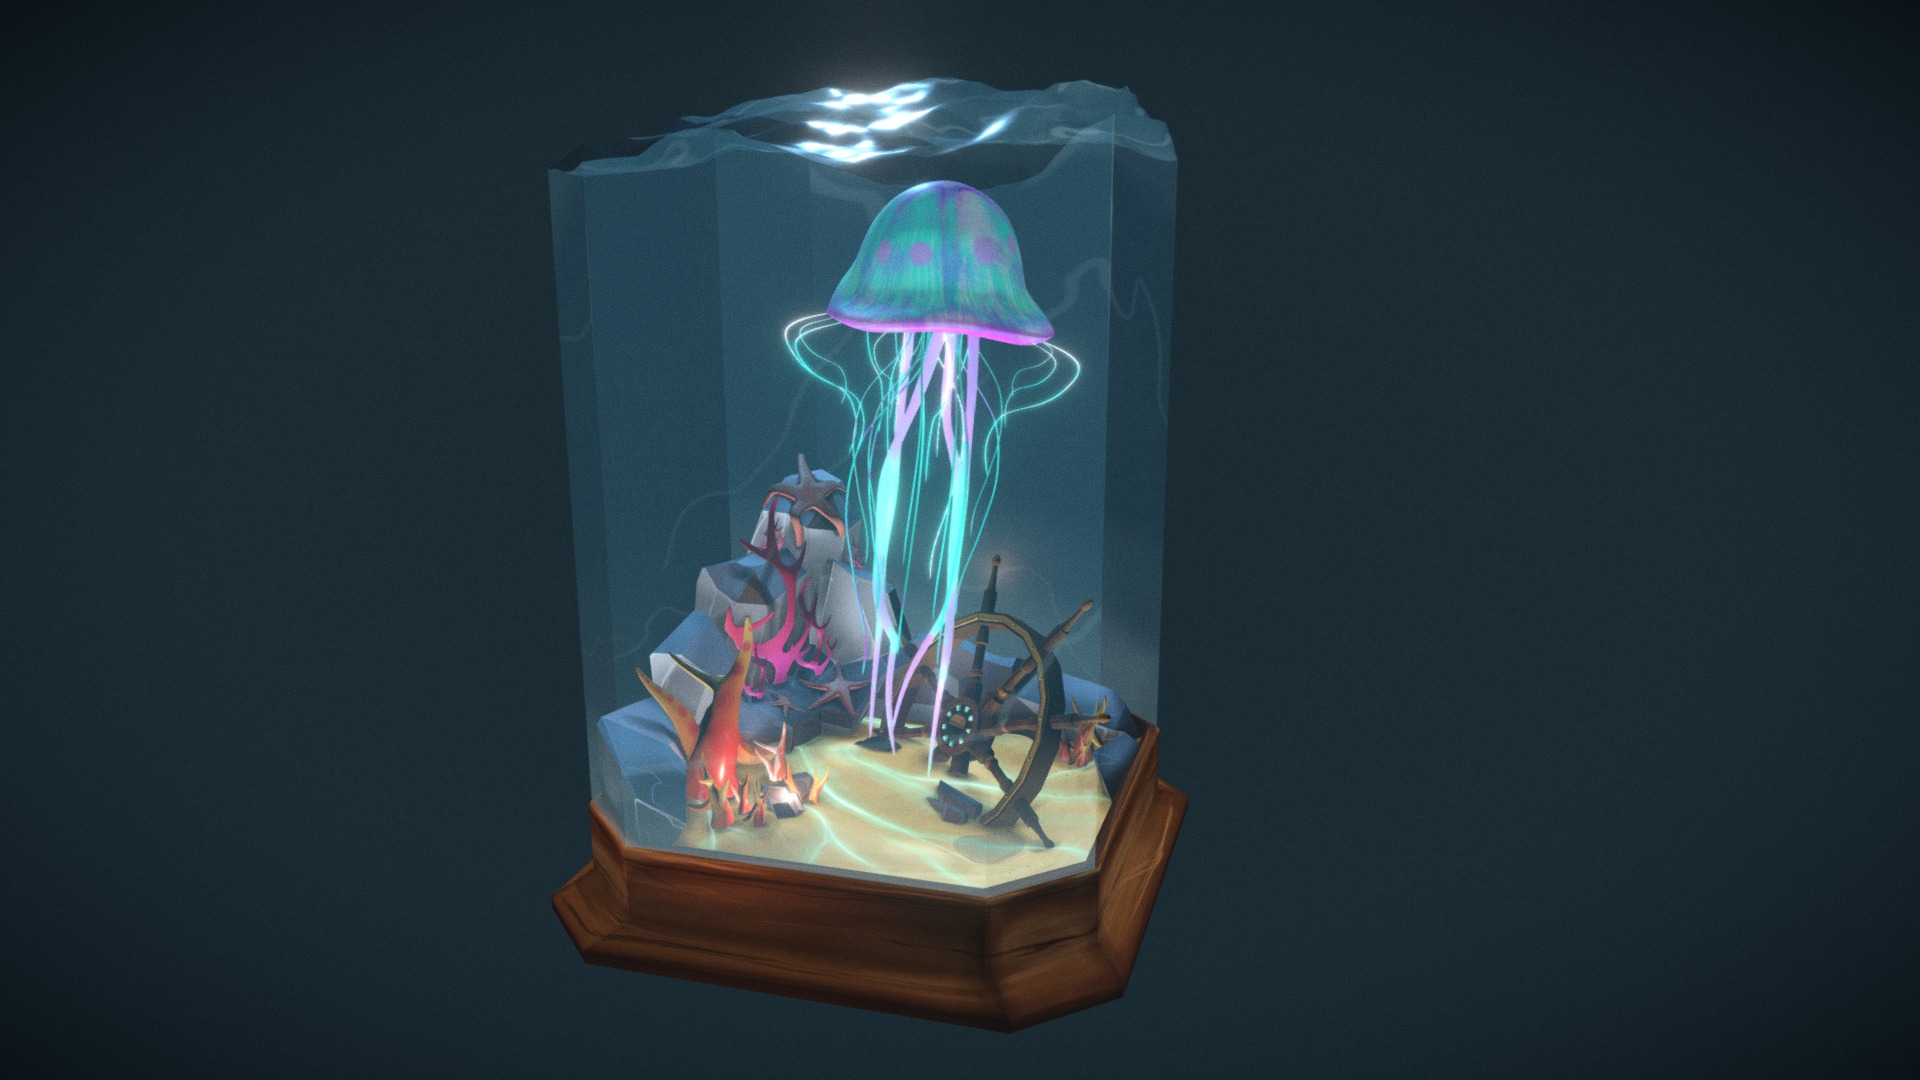 3D model Jellyfish Diorama - This is a 3D model of the Jellyfish Diorama. The 3D model is about a display of a glass display.